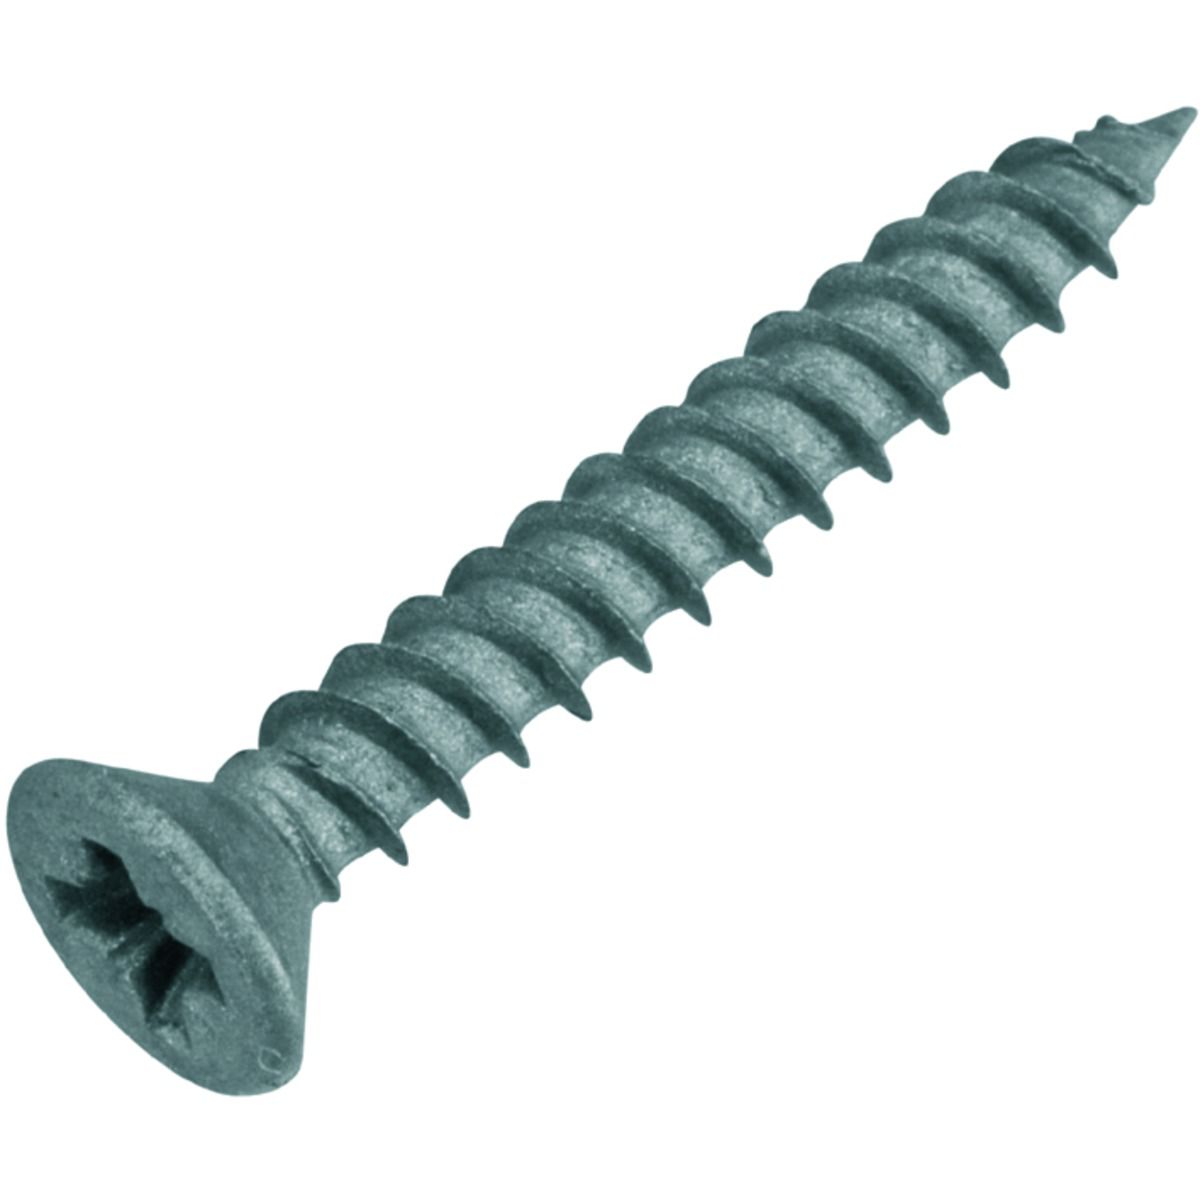 Image of Wickes External Grade Screws - Green No 6 x 23mm Pack of 30